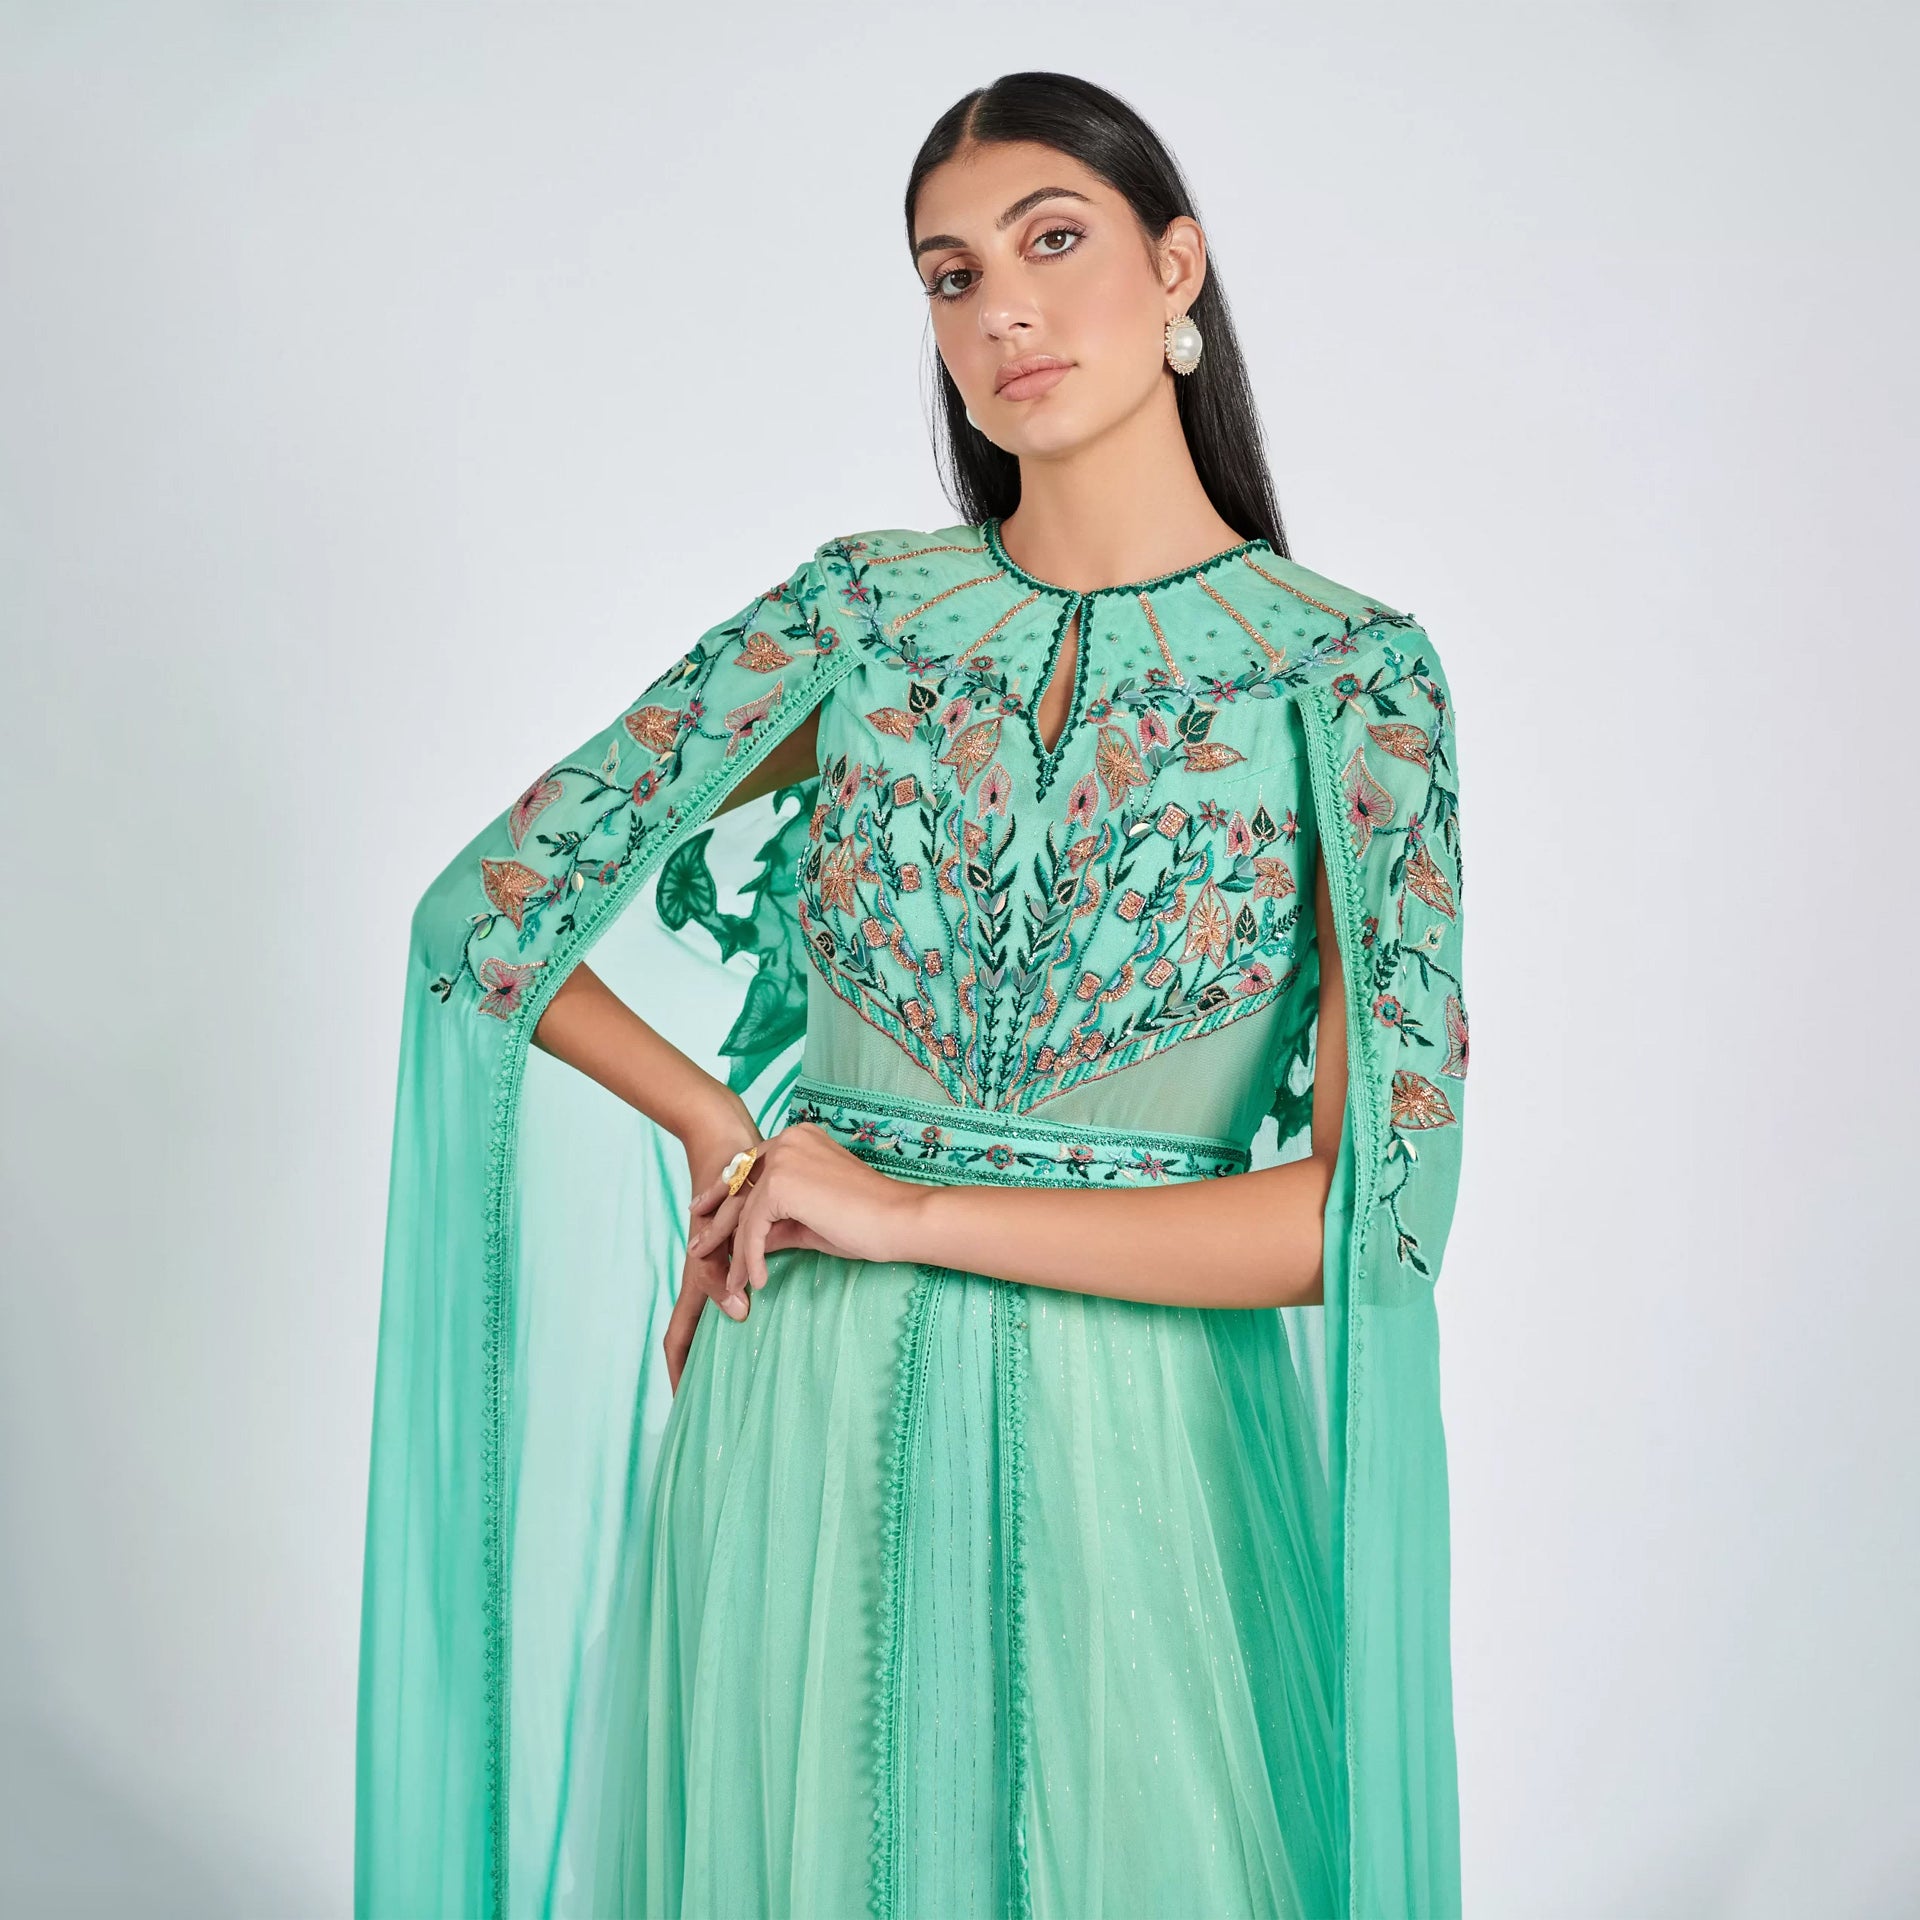 Turquoise Embroidery Samantha Dress From Shalky